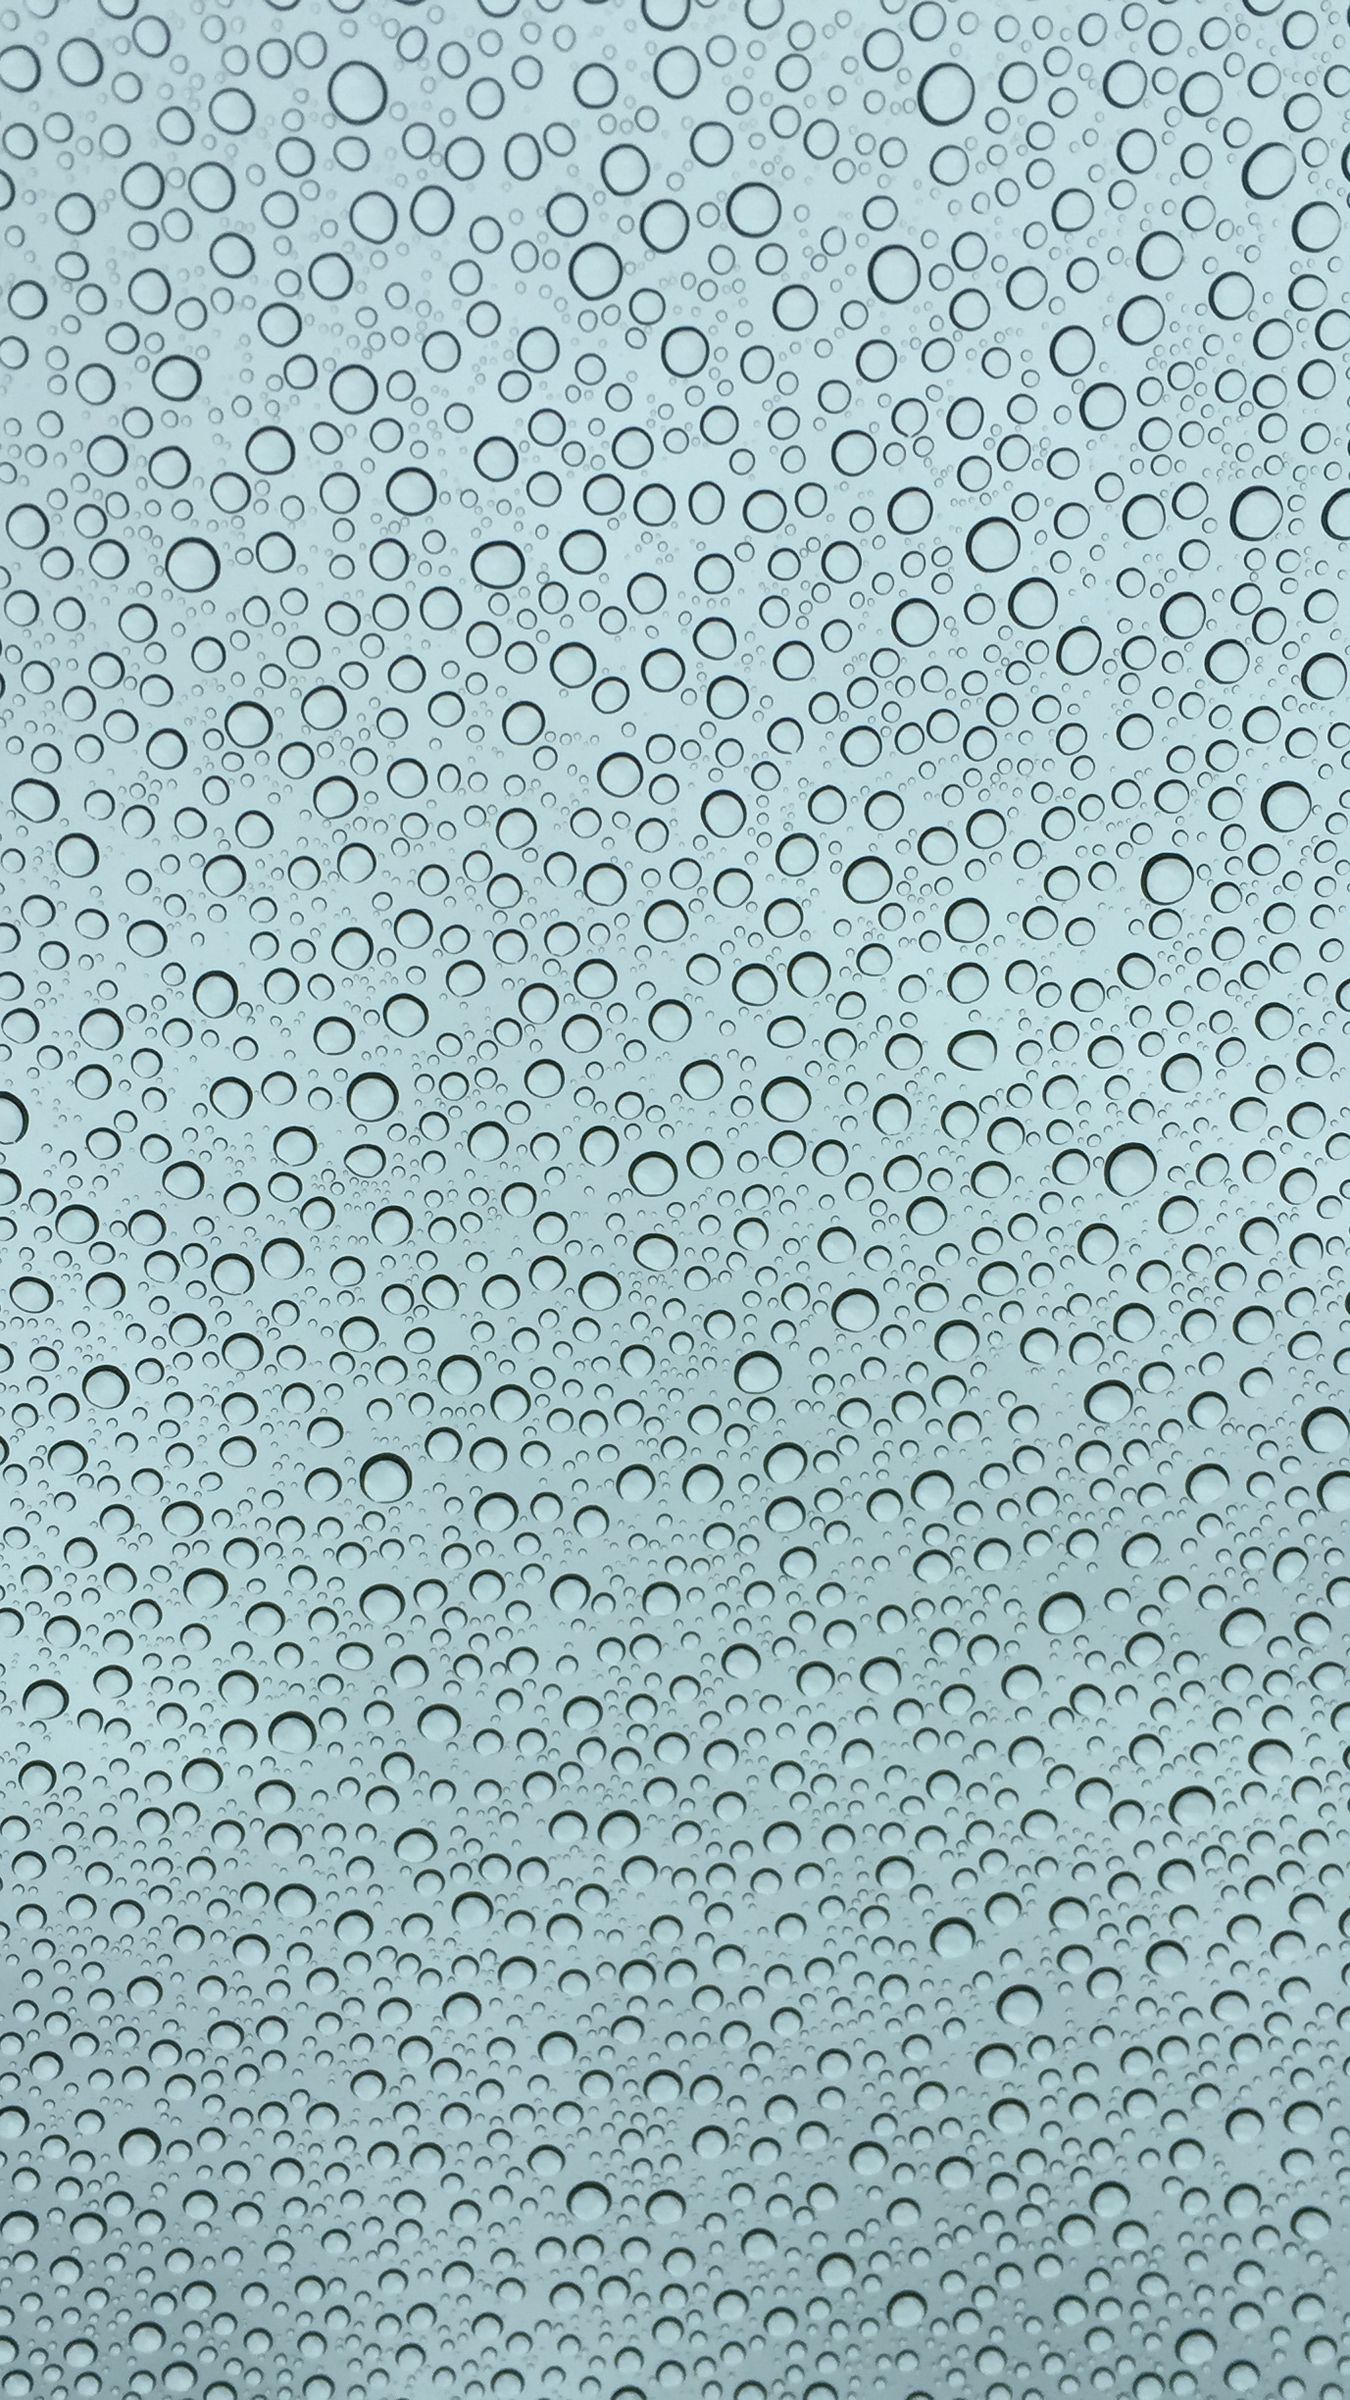 Download wallpaper 1350x2400 drops, surface, liquid, bubbles iphone 8+/7+/6s+/for parallax HD background